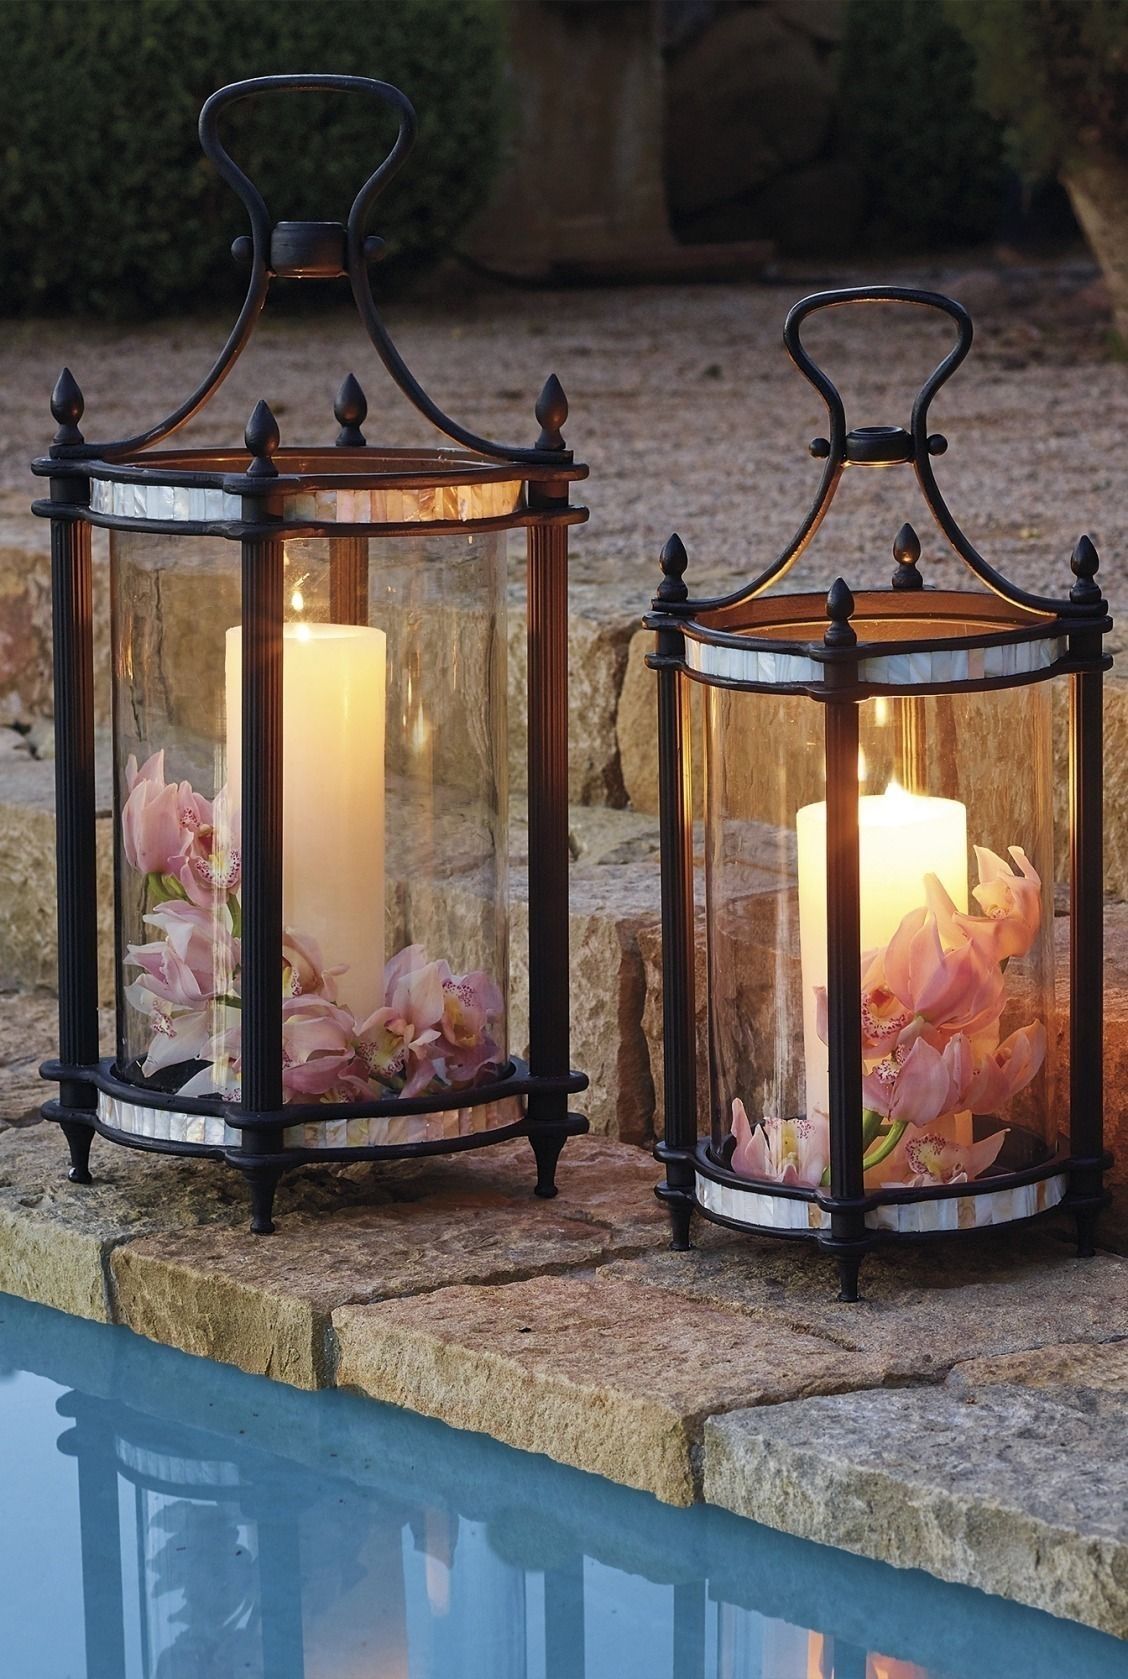 Rimini Lantern | Outdoor Living And Outdoor Living Areas Inside Quality Outdoor Lanterns (View 17 of 20)